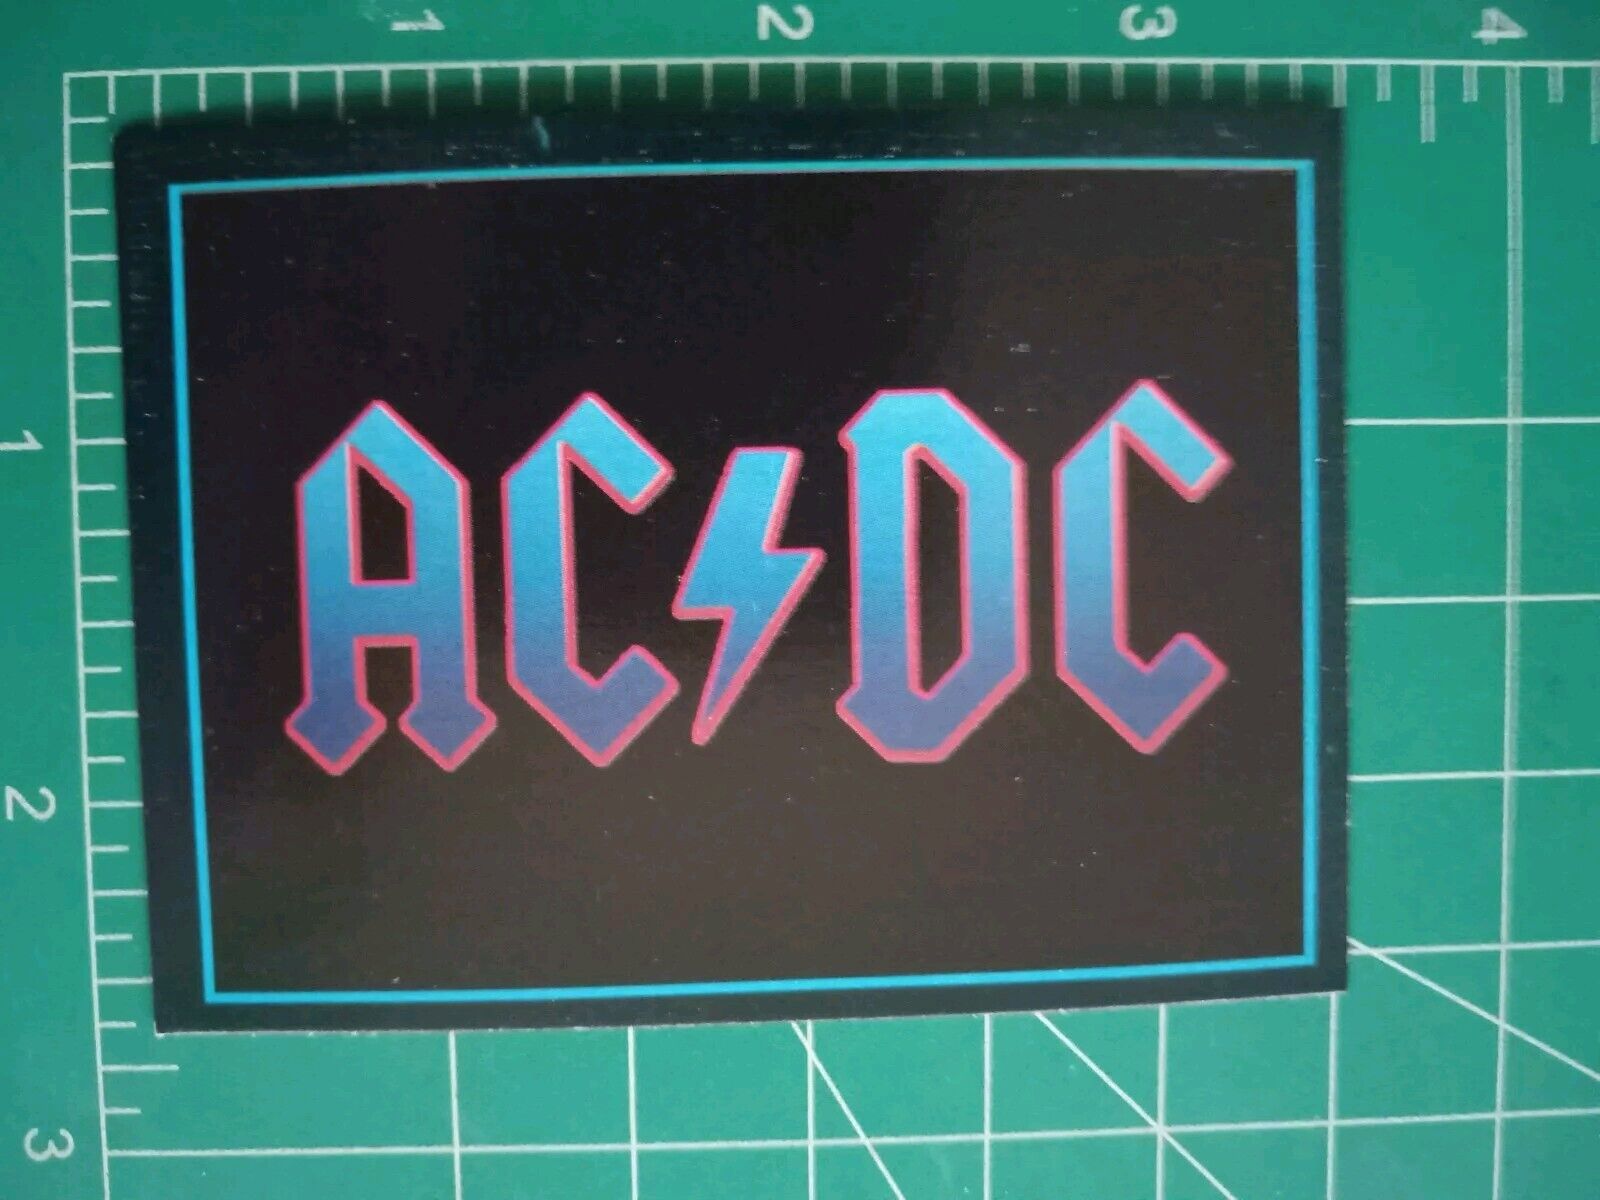 1994 Argentina Rock MUSIC CARD ULTRA FIGUS AC DC GROUP BAND LOGO